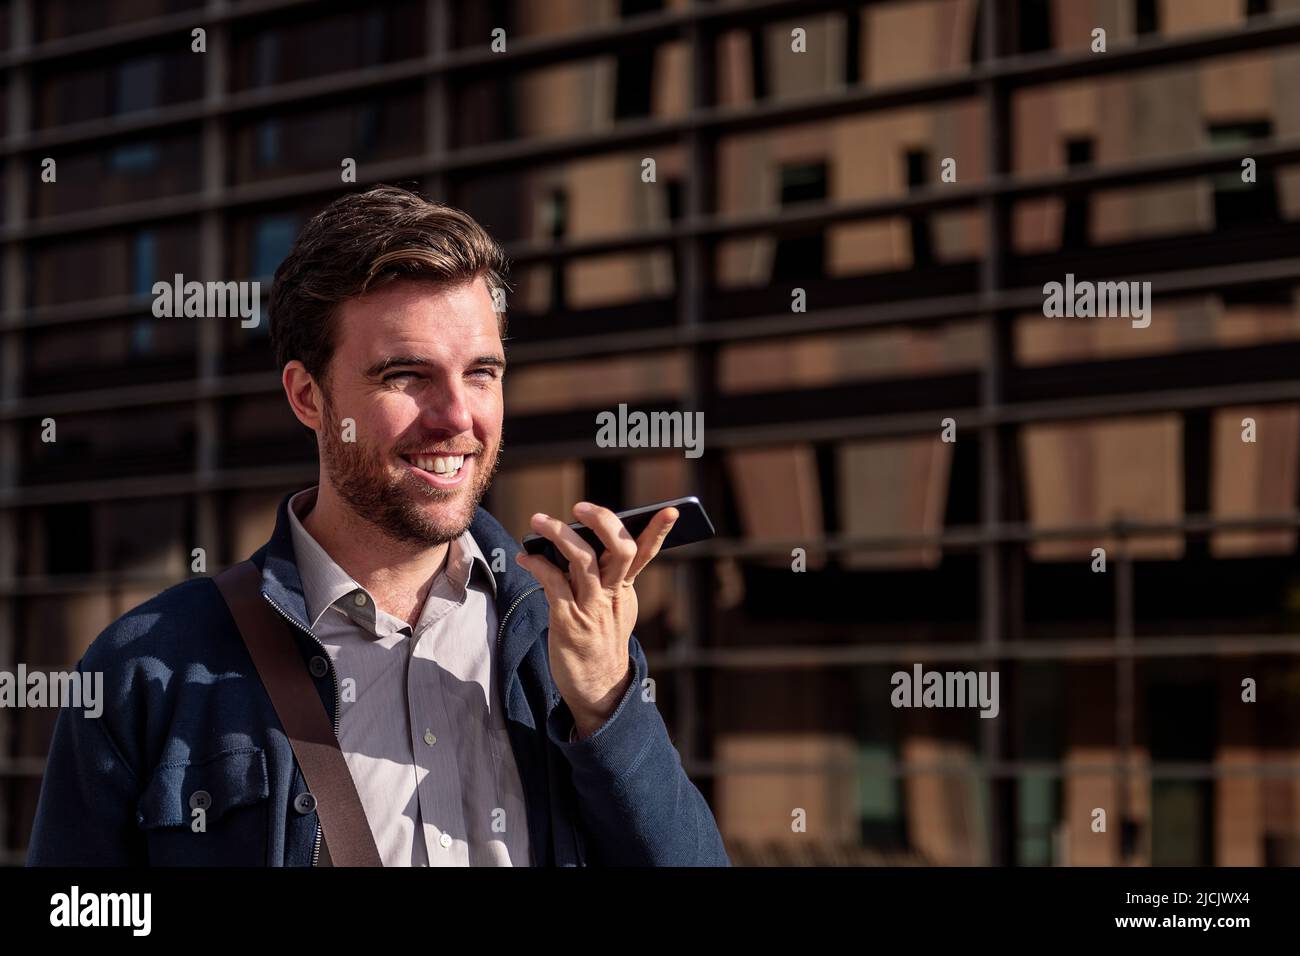 smiling young businessman sending a voice message Stock Photo